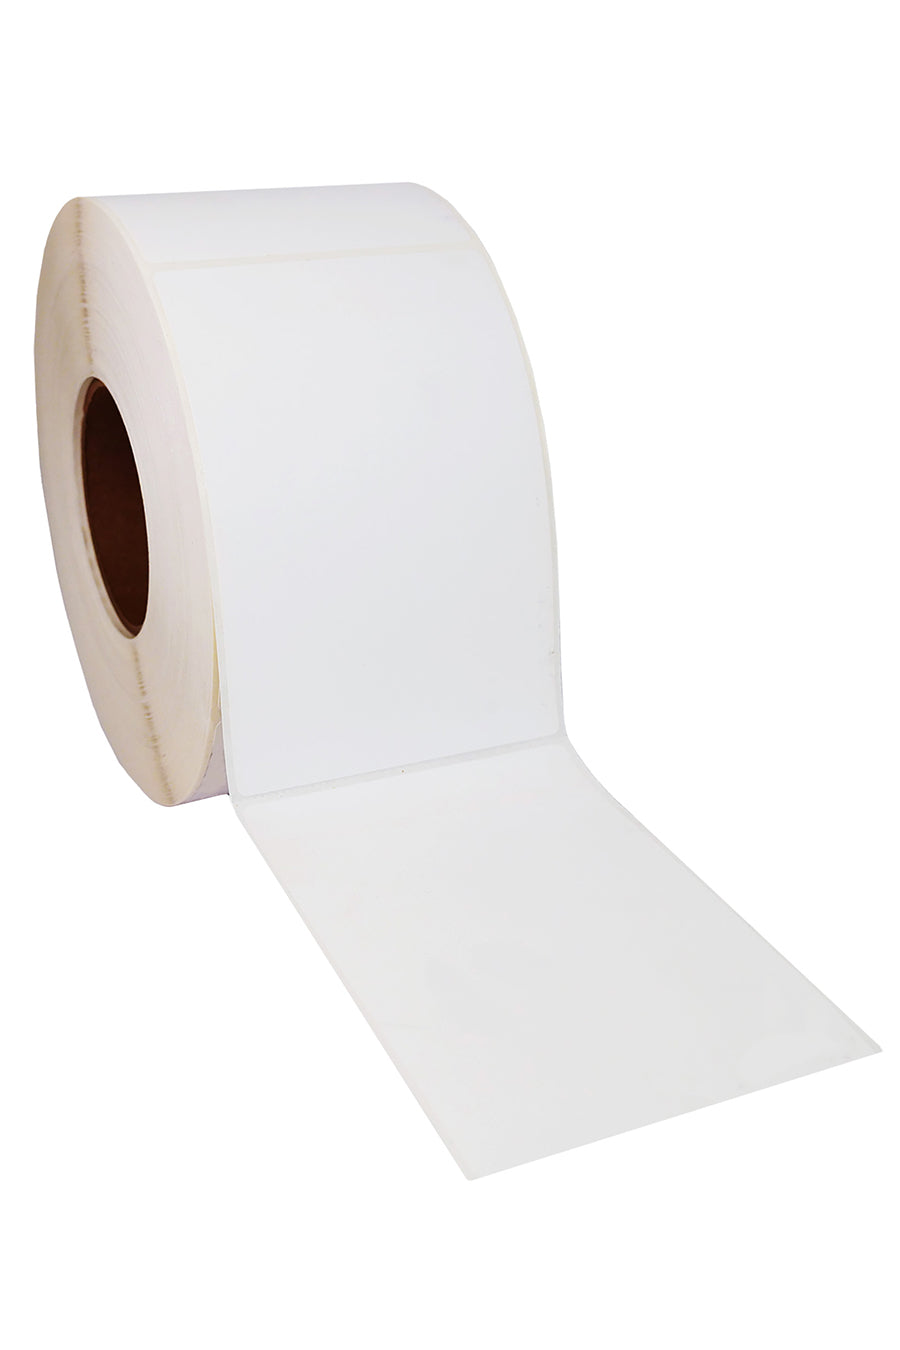 Direct Thermal White Shipping Labels, 4" x 6", 1000/Roll, 4 Rolls/Ea